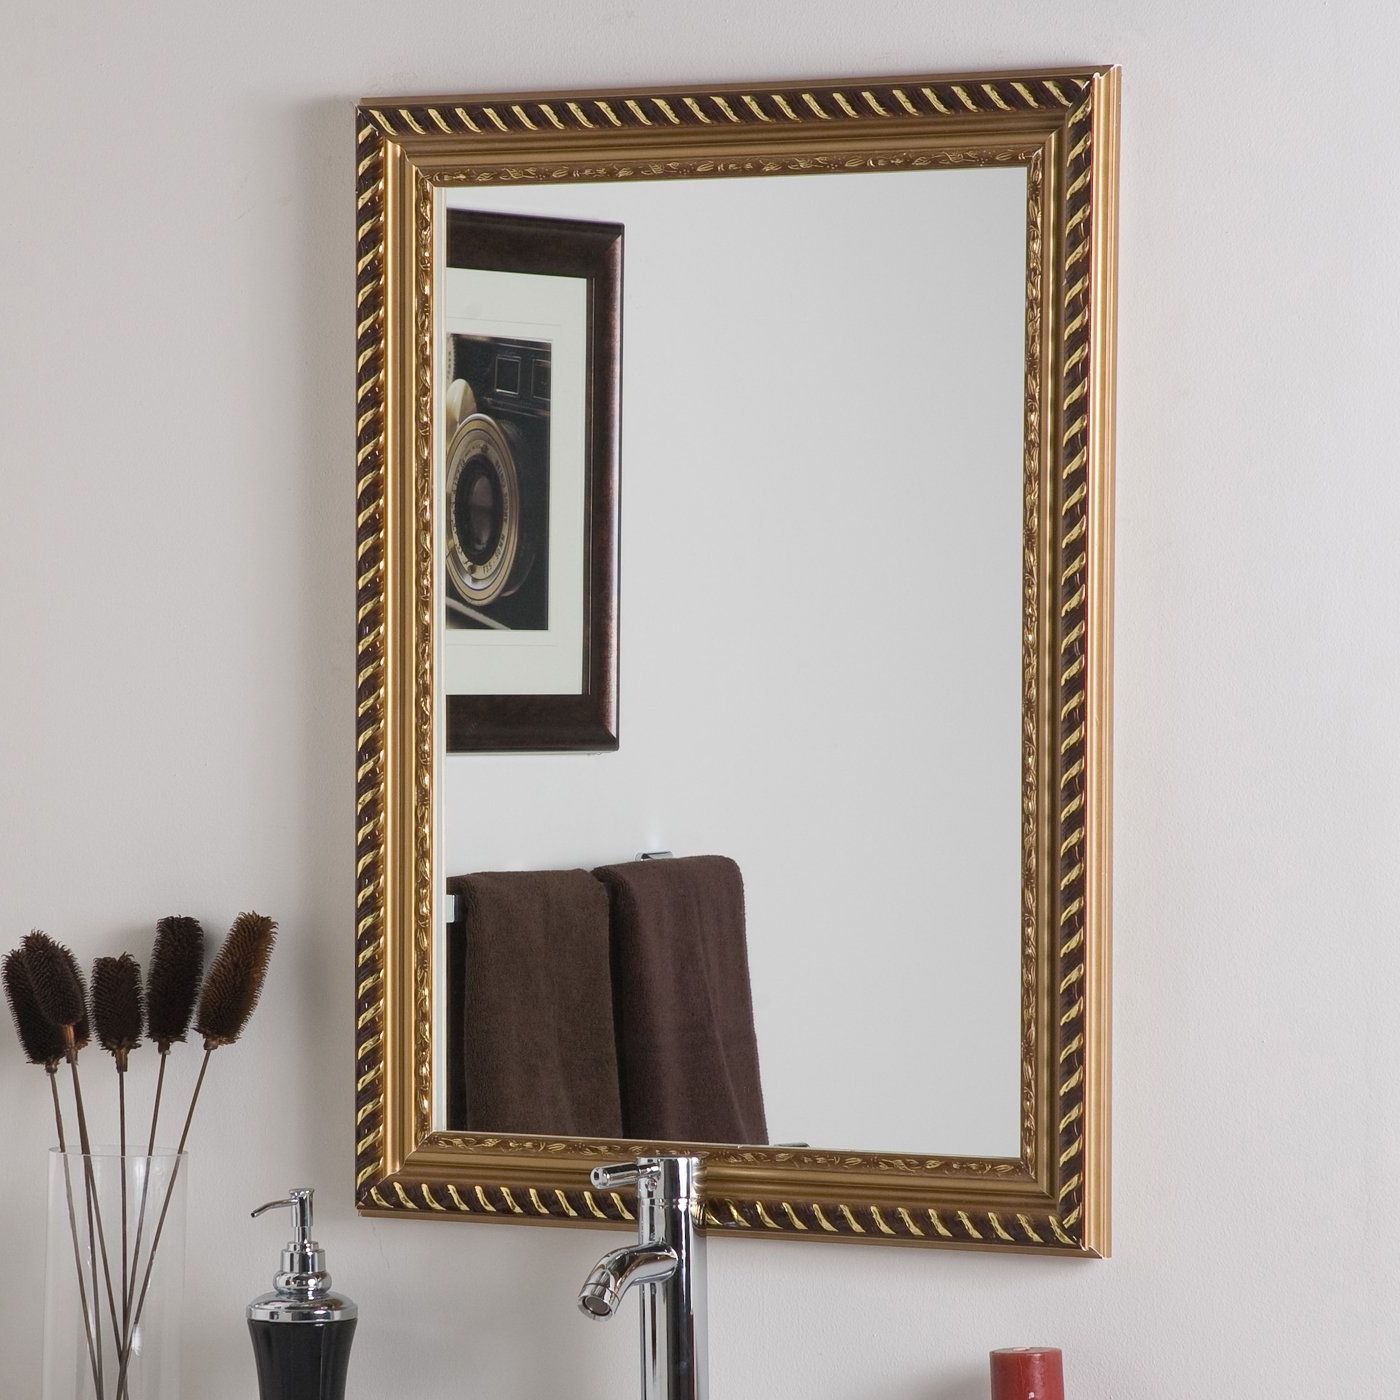 Preferred Gold Framed Wall Mirrors Throughout Decor Wonderland Marina Gold Framed Wall Mirror (View 18 of 20)